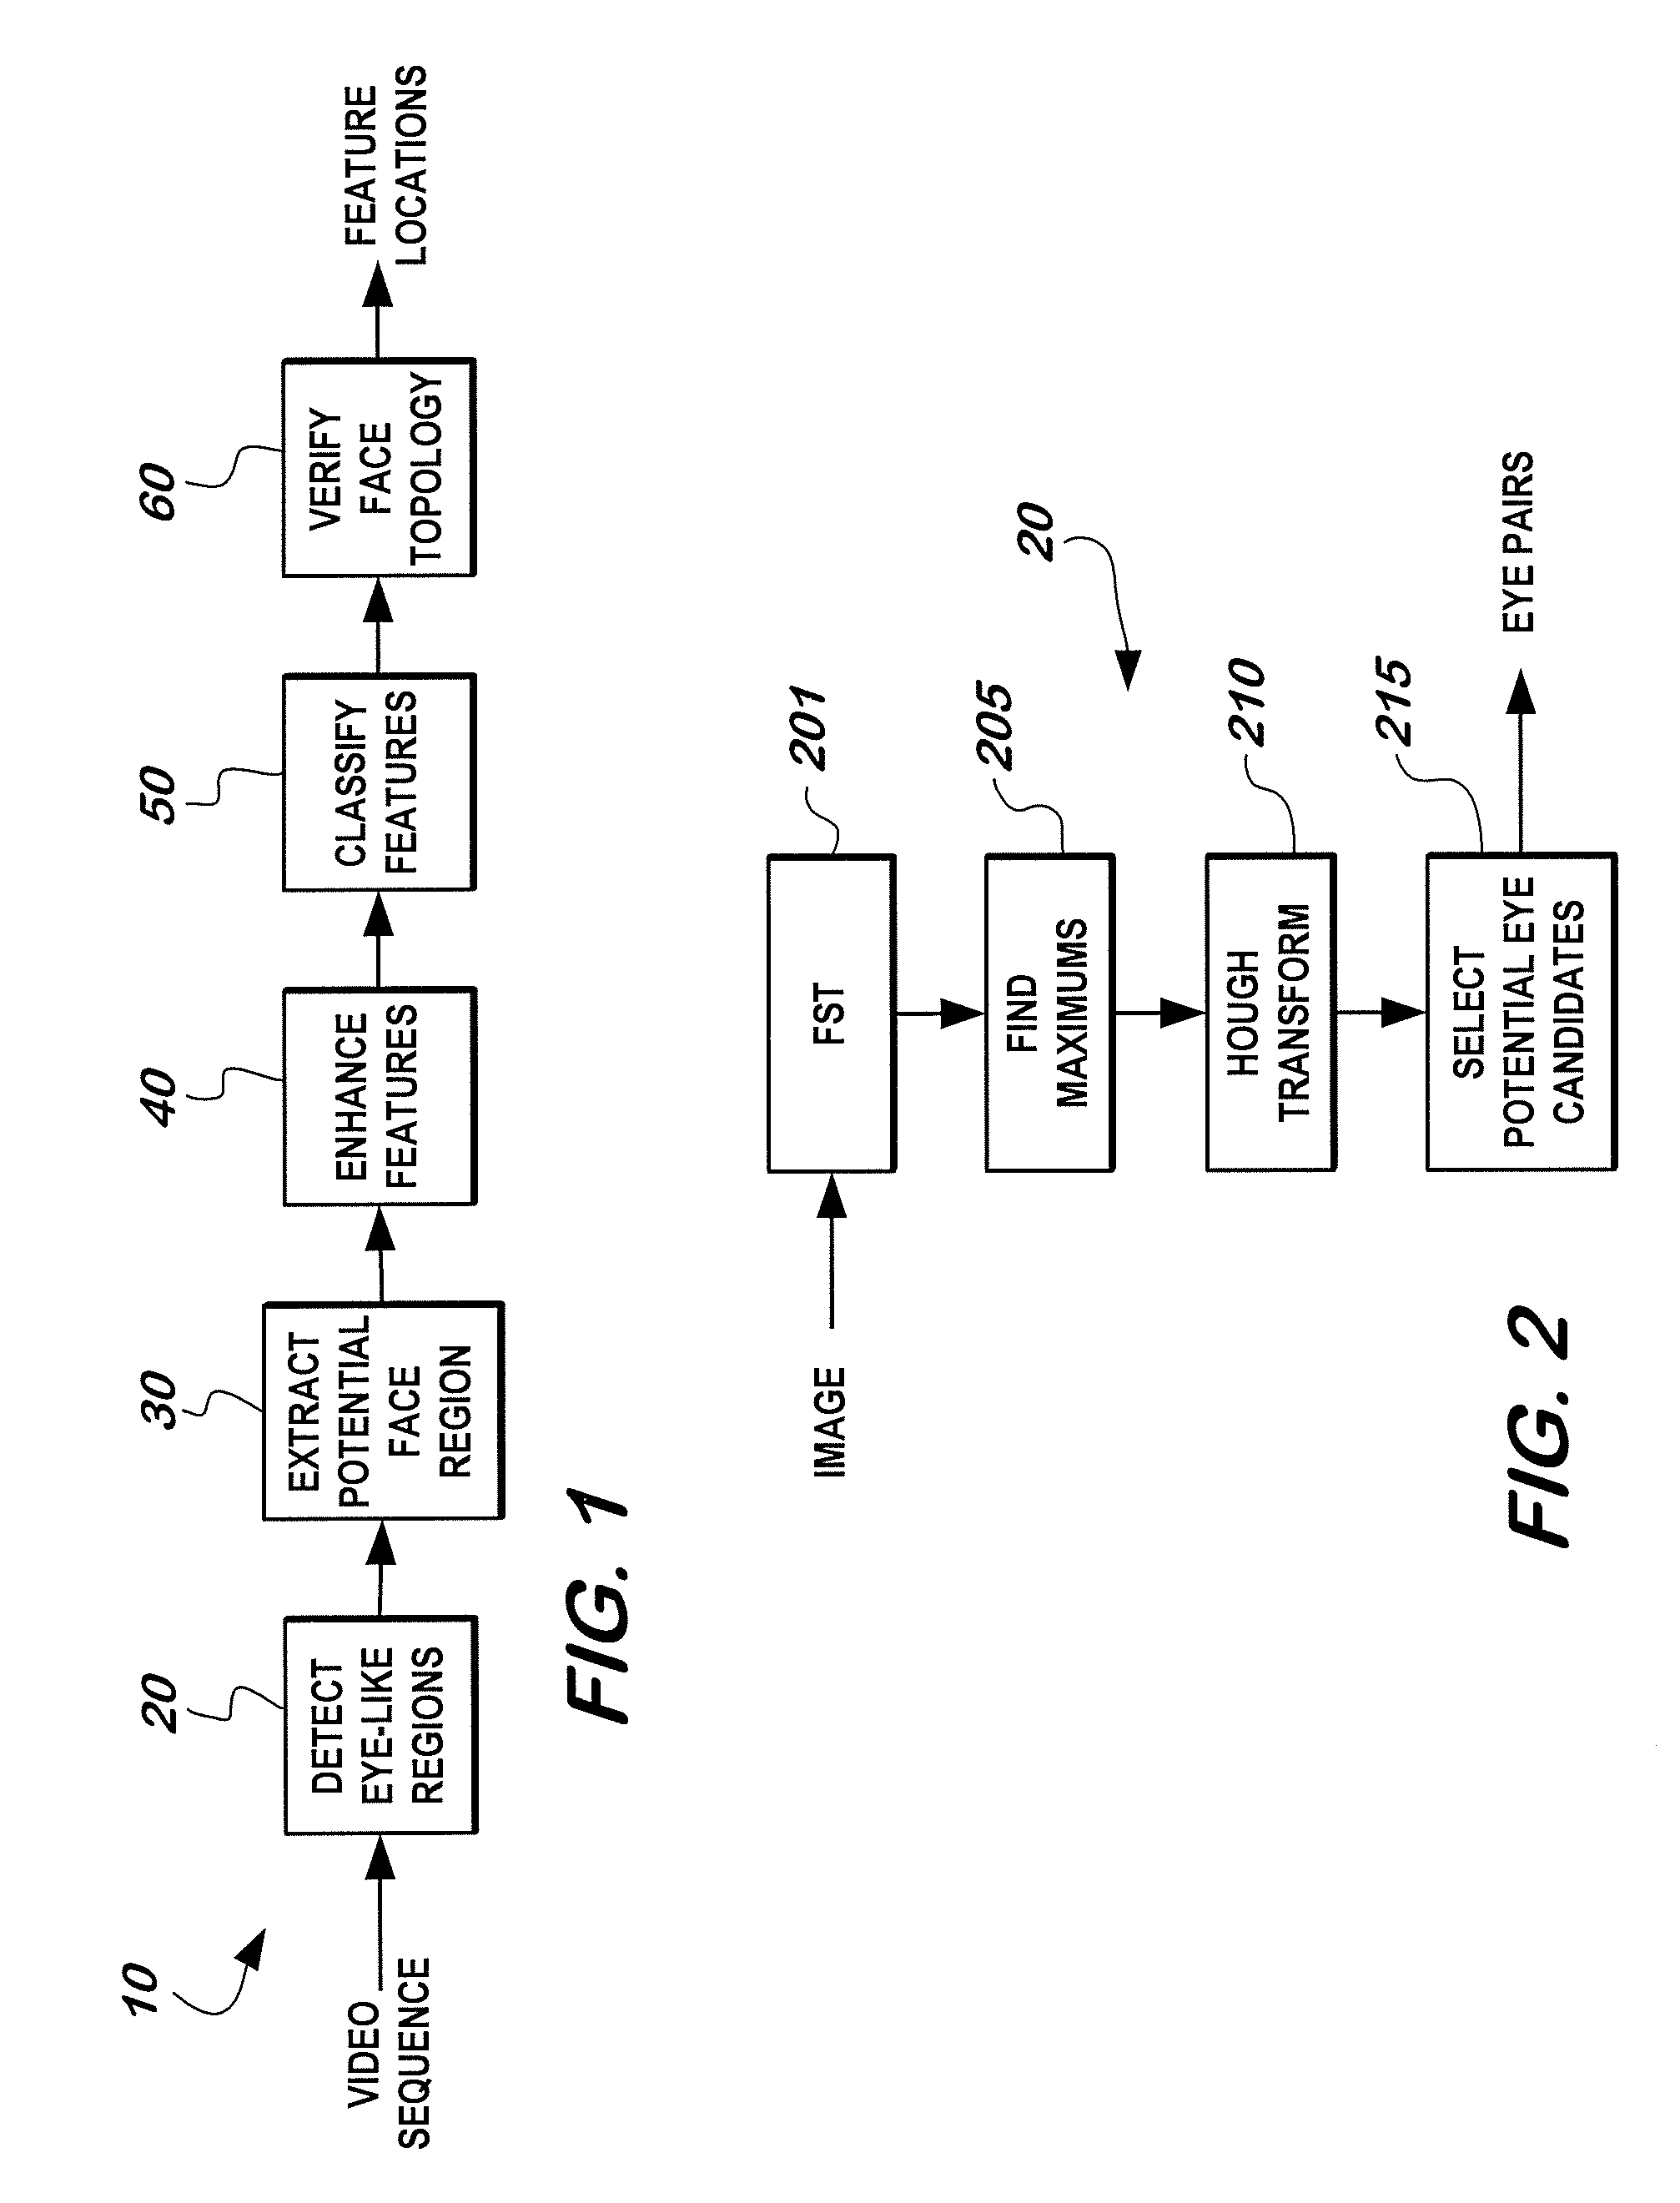 Method and apparatus for the automatic detection of facial features